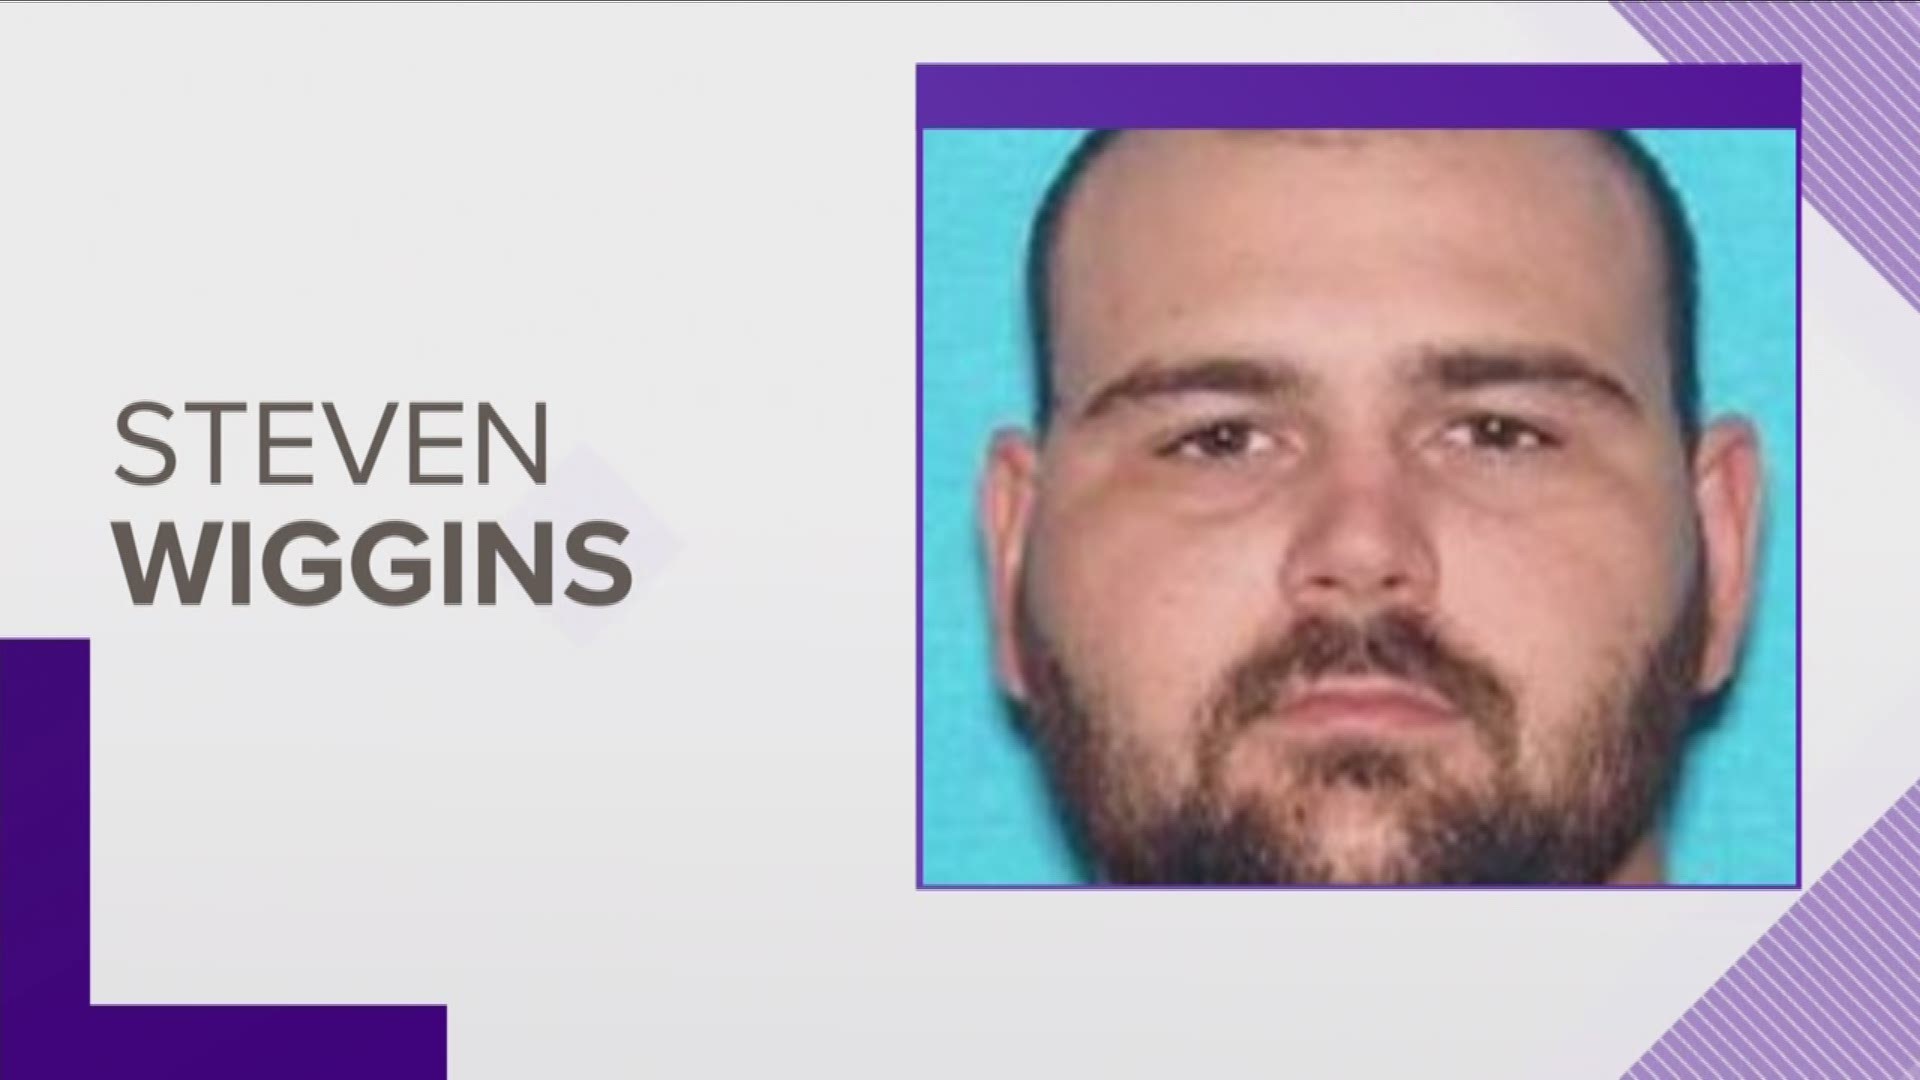 The Tennessee Bureau of Investigation said they issued a Blue Alert for Steven Wiggins, a person-of-interest in the shooting. The TBI also added him to its Top 10 Most Wanted List with a $2,500 reward, saying he's wanted by the Cheatham County Sheriff's O